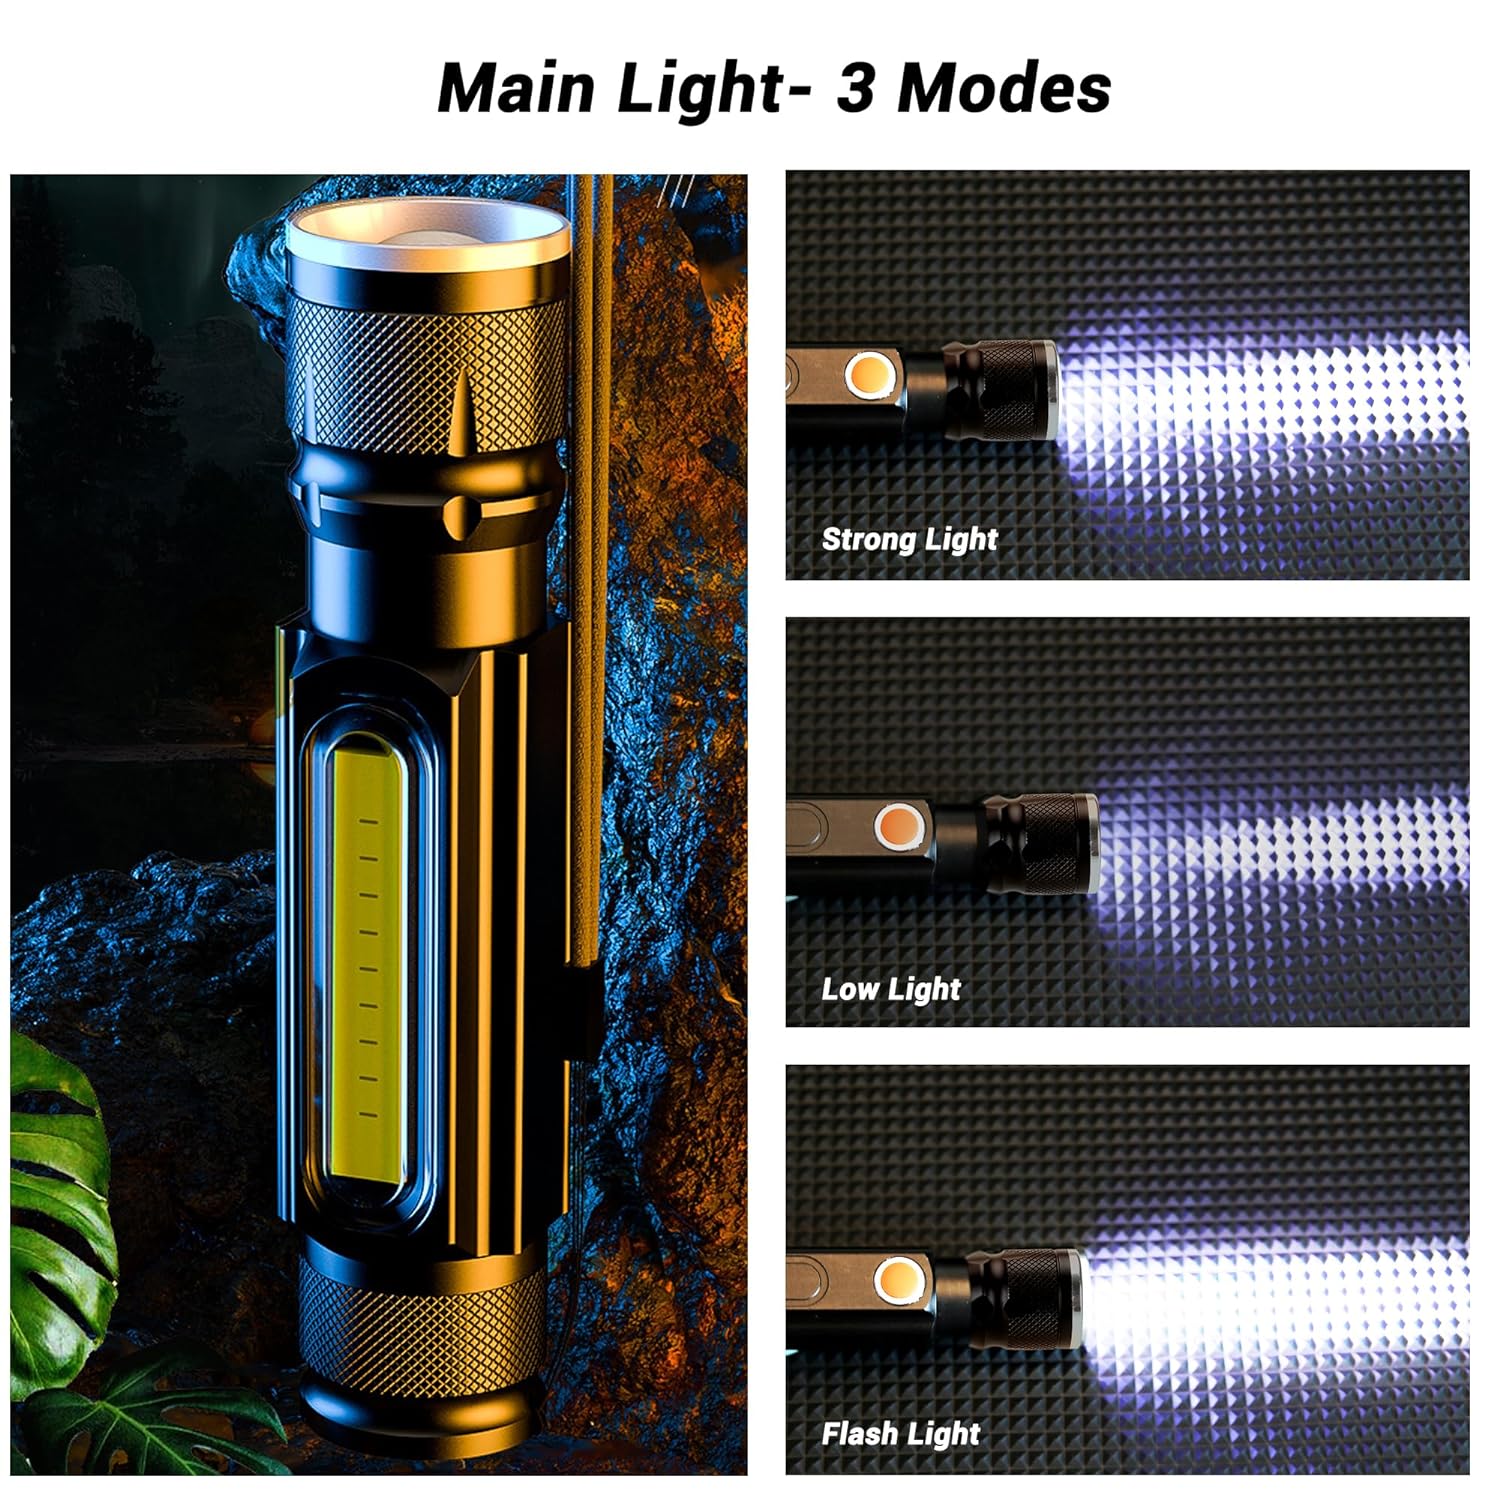 FZH Small Flashlights Zoomable - 1500mAh Rechargeable Flashlights Without USB Cable, 1000 Lumens Mini Flashlights 5 Light Modes with Magnetic, Waterproof Flashlight for Emergencies, Camping, Hiking